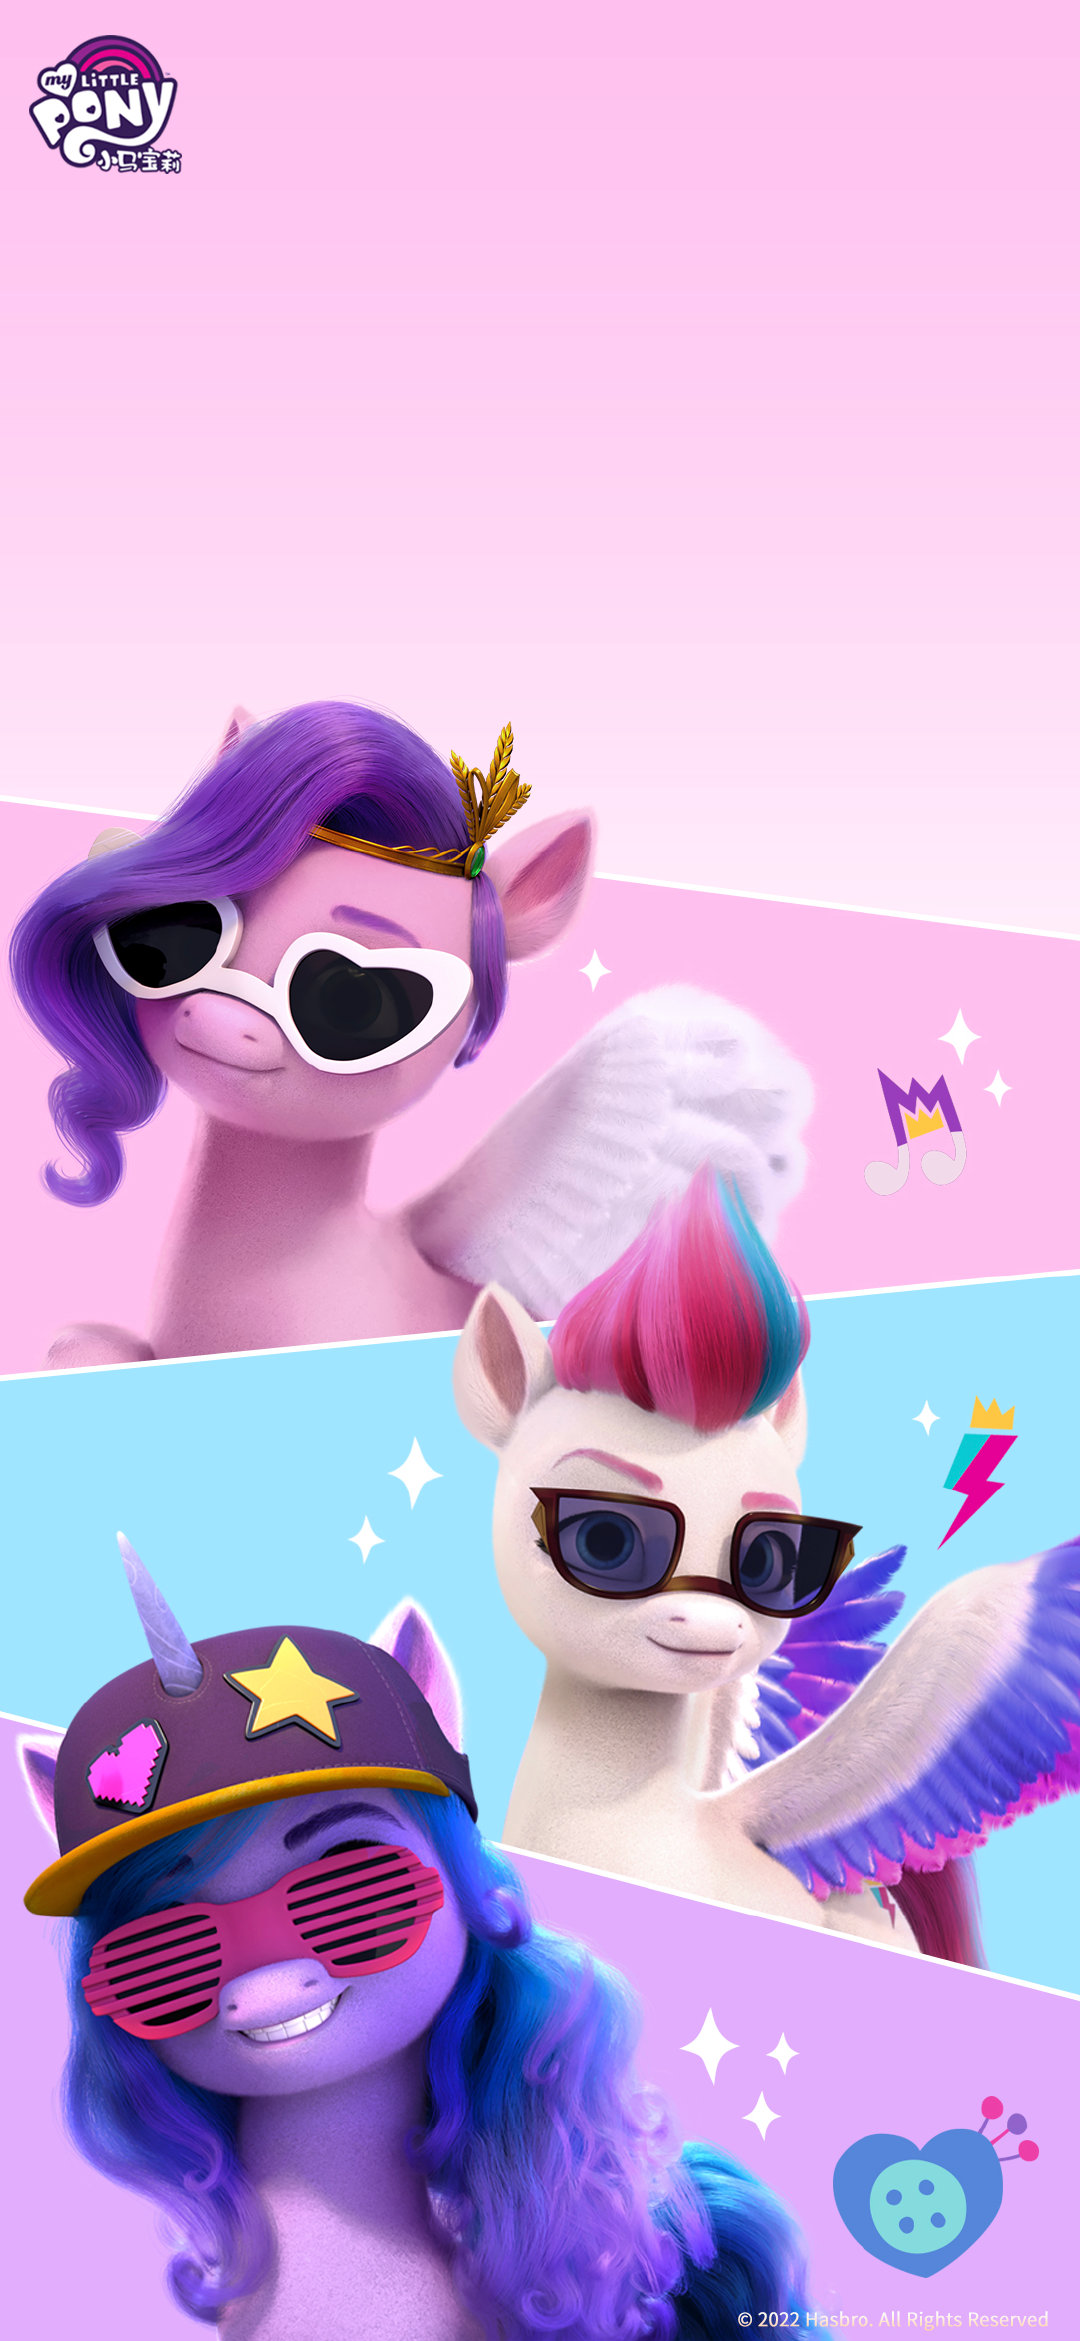 100+] My Little Pony Wallpapers | Wallpapers.com